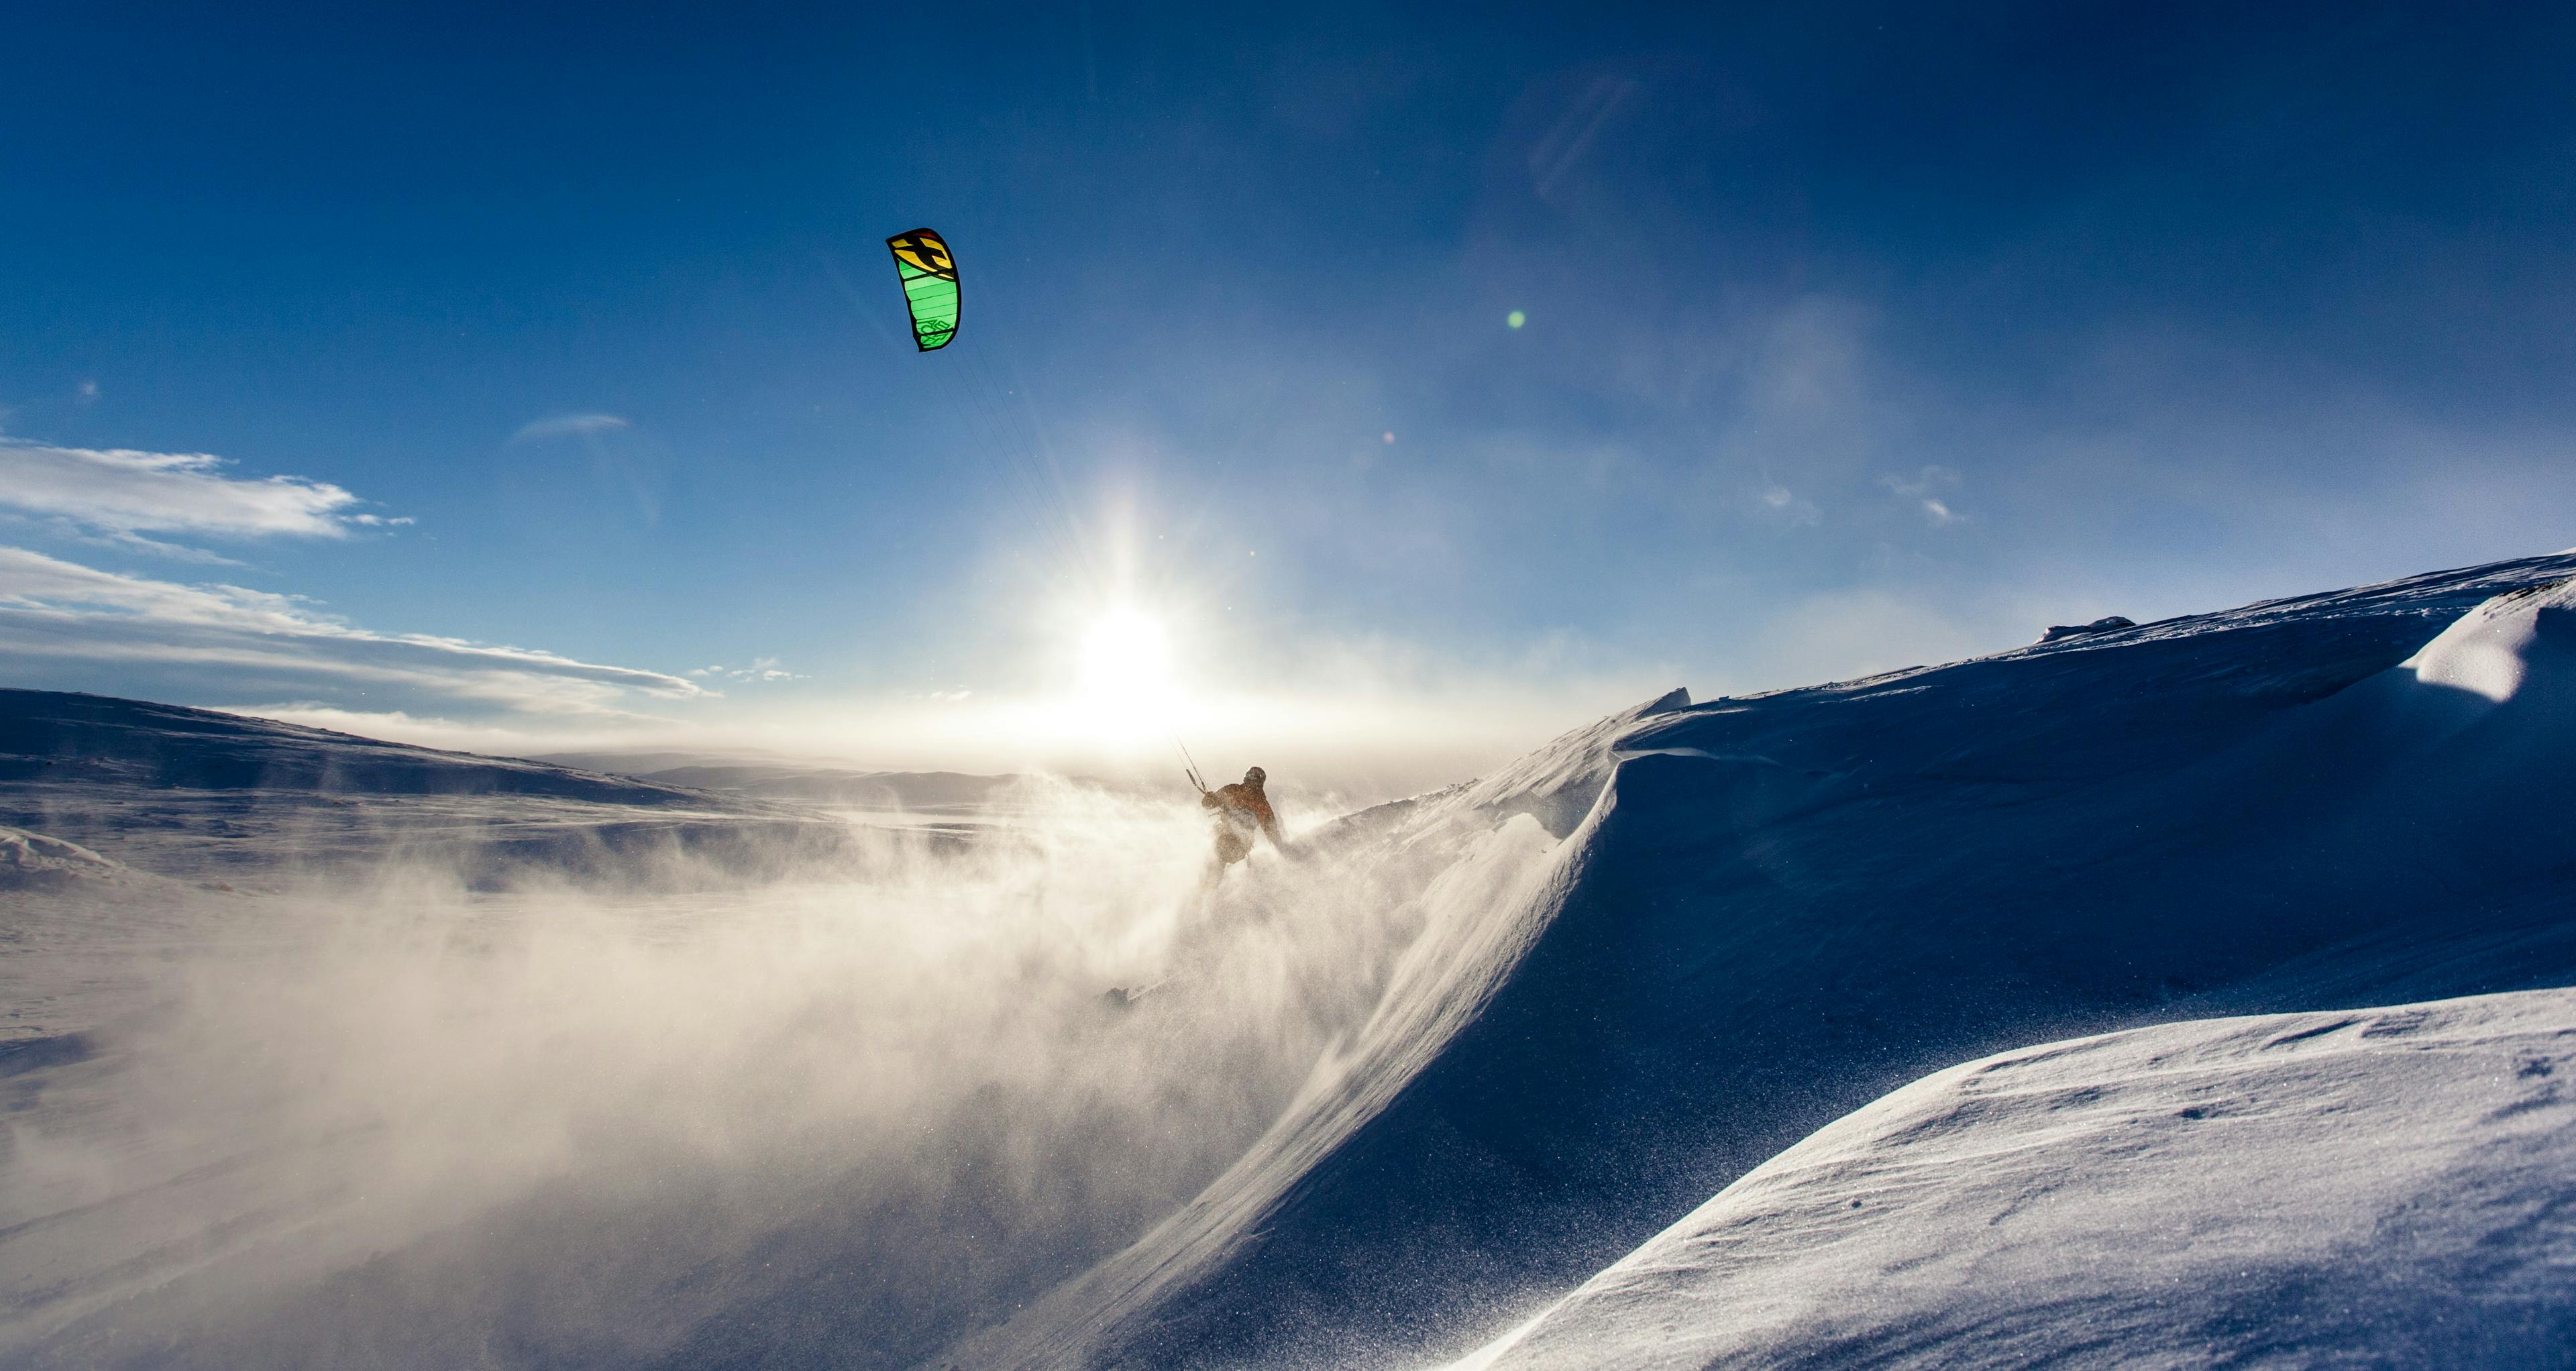 Man snow kiting on snowy mountain on holiday at sunset